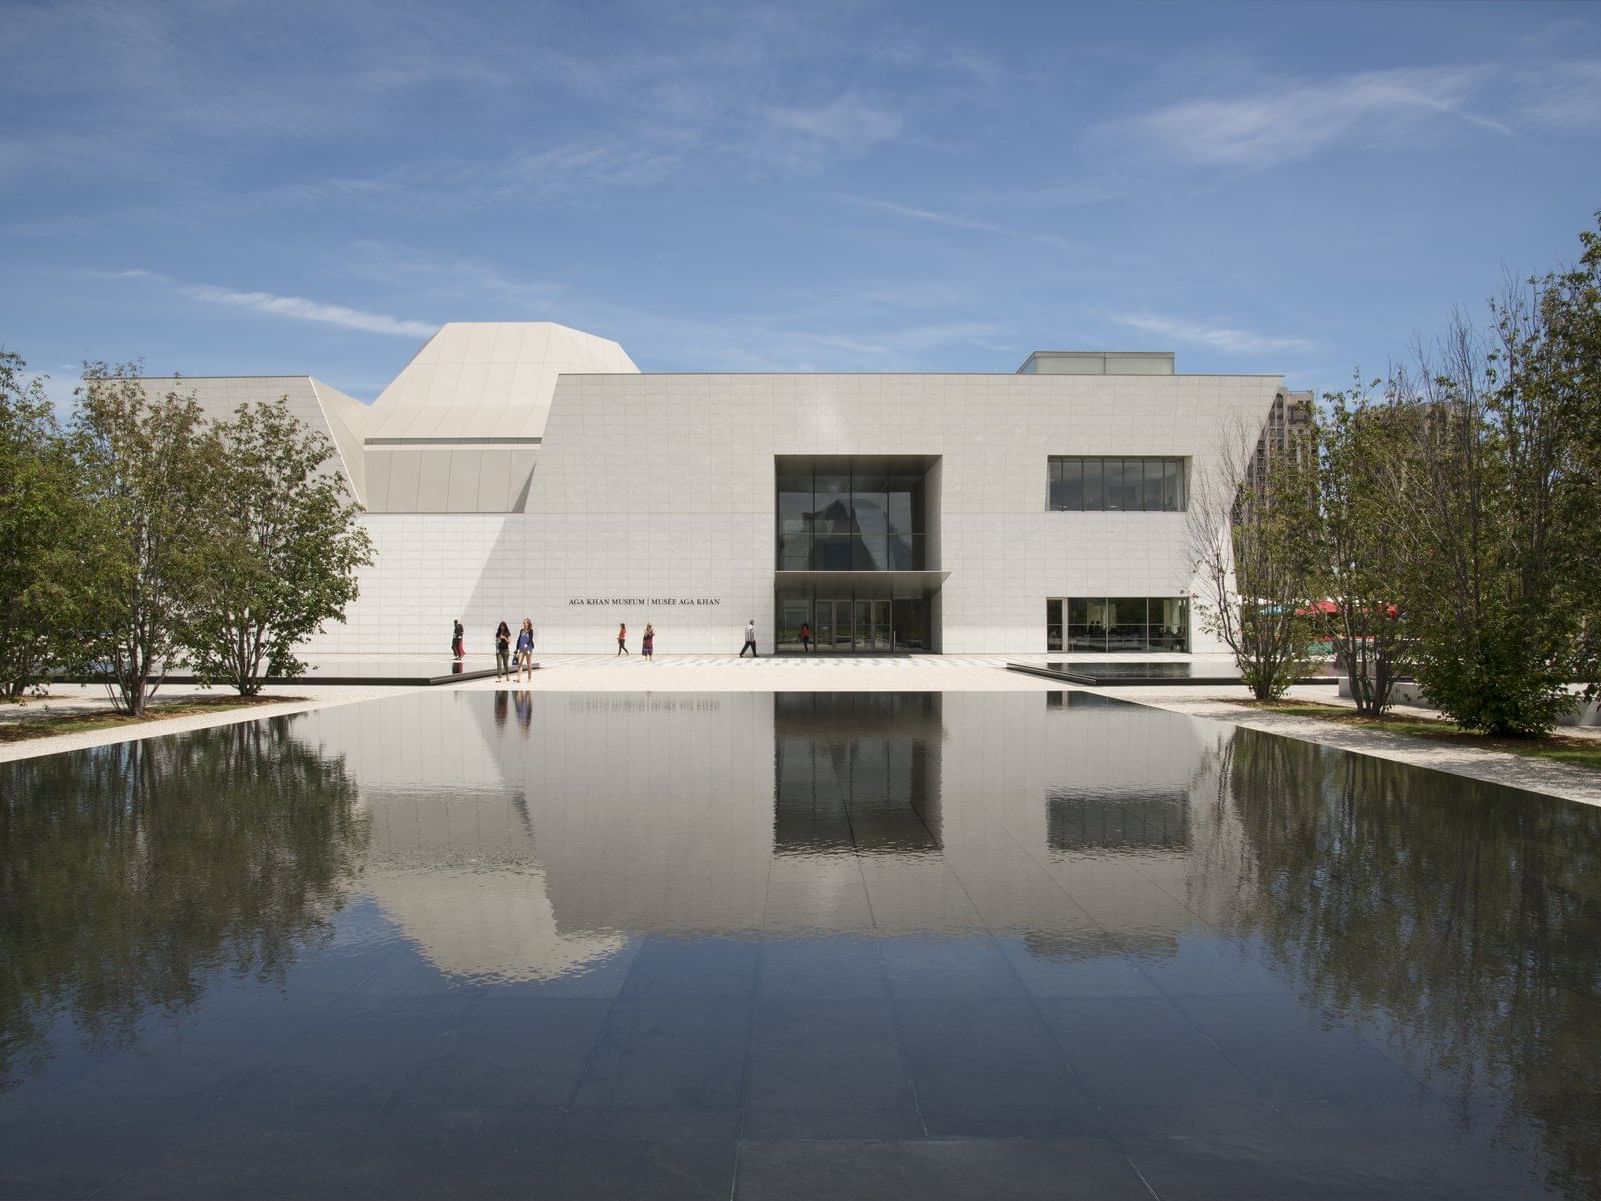 Reflecting pool in front of the Aga Khan Museum